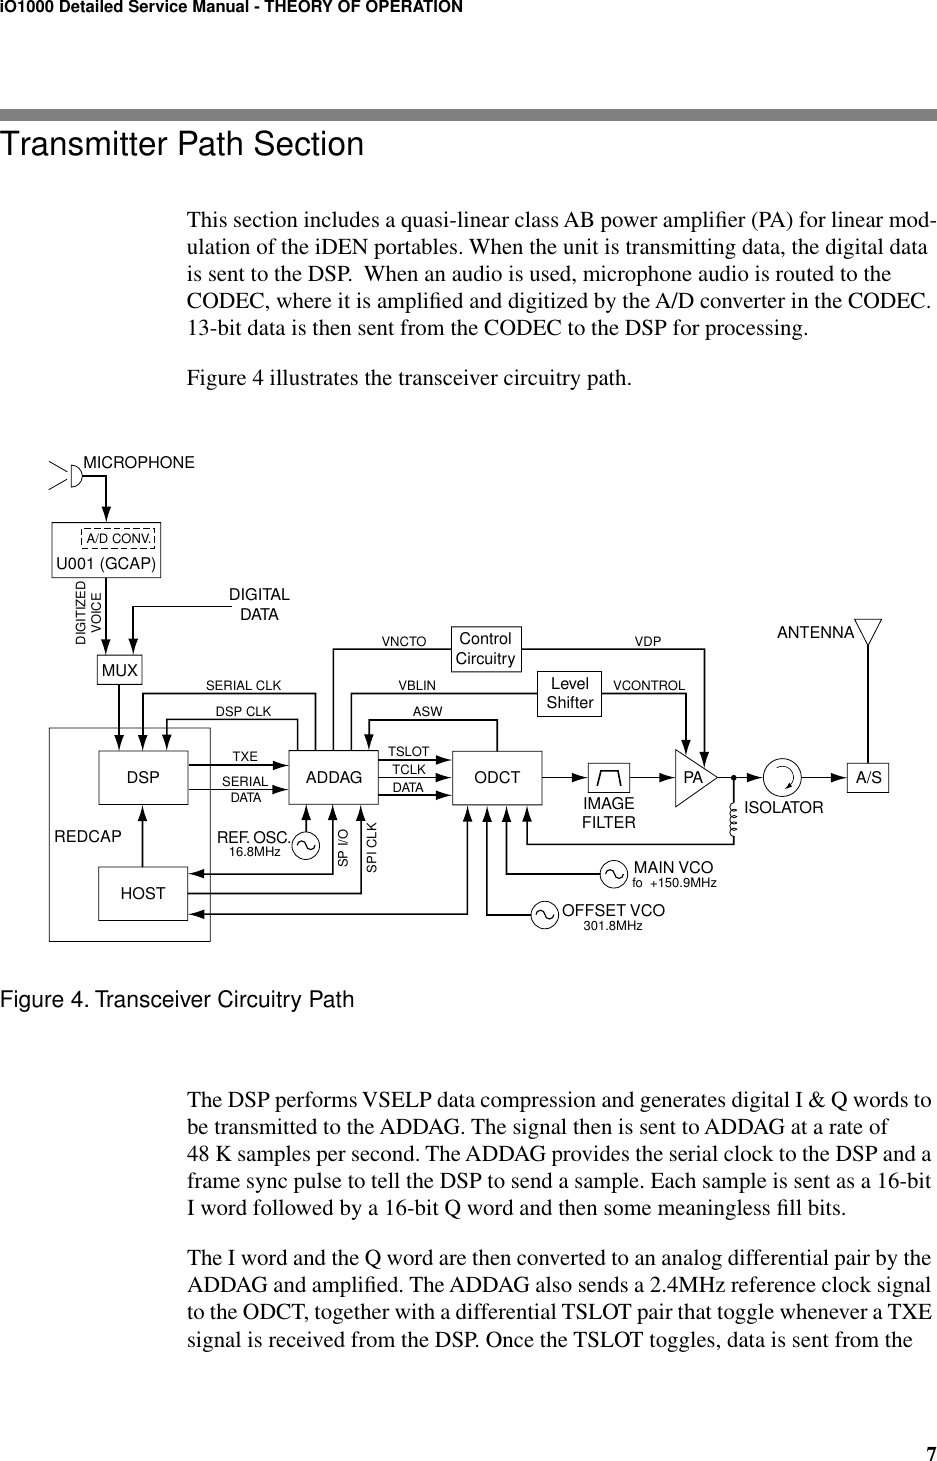  7 iO1000 Detailed Service Manual - THEORY OF OPERATION Transmitter Path Section This section includes a quasi-linear class AB power ampliﬁer (PA) for linear mod-ulation of the iDEN portables. When the unit is transmitting data, the digital data is sent to the DSP.  When an audio is used, microphone audio is routed to the CODEC, where it is ampliﬁed and digitized by the A/D converter in the CODEC. 13-bit data is then sent from the CODEC to the DSP for processing.Figure 4 illustrates the transceiver circuitry path. Figure 4. Transceiver Circuitry Path The DSP performs VSELP data compression and generates digital I &amp; Q words to be transmitted to the ADDAG. The signal then is sent to ADDAG at a rate of 48 K samples per second. The ADDAG provides the serial clock to the DSP and a frame sync pulse to tell the DSP to send a sample. Each sample is sent as a 16-bit I word followed by a 16-bit Q word and then some meaningless ﬁll bits.The I word and the Q word are then converted to an analog differential pair by the ADDAG and ampliﬁed. The ADDAG also sends a 2.4MHz reference clock signal to the ODCT, together with a differential TSLOT pair that toggle whenever a TXE signal is received from the DSP. Once the TSLOT toggles, data is sent from the DSP ADDAG ODCT PAISOLATORMAIN VCOOFFSET VCOREF. OSC.A/SANTENNAIMAGEFILTERHOSTREDCAPControlCircuitryMUXDIGITALDATAU001 (GCAP)MICROPHONETXESERIALDATATSLOTfo  +150.9MHz301.8MHzTCLKDATAASWVBLINVNCTODSP CLKSERIAL CLKA/D CONV.DIGITIZEDVOICESPI CLKVCONTROLVDPSP I/O16.8MHzLevelShifter